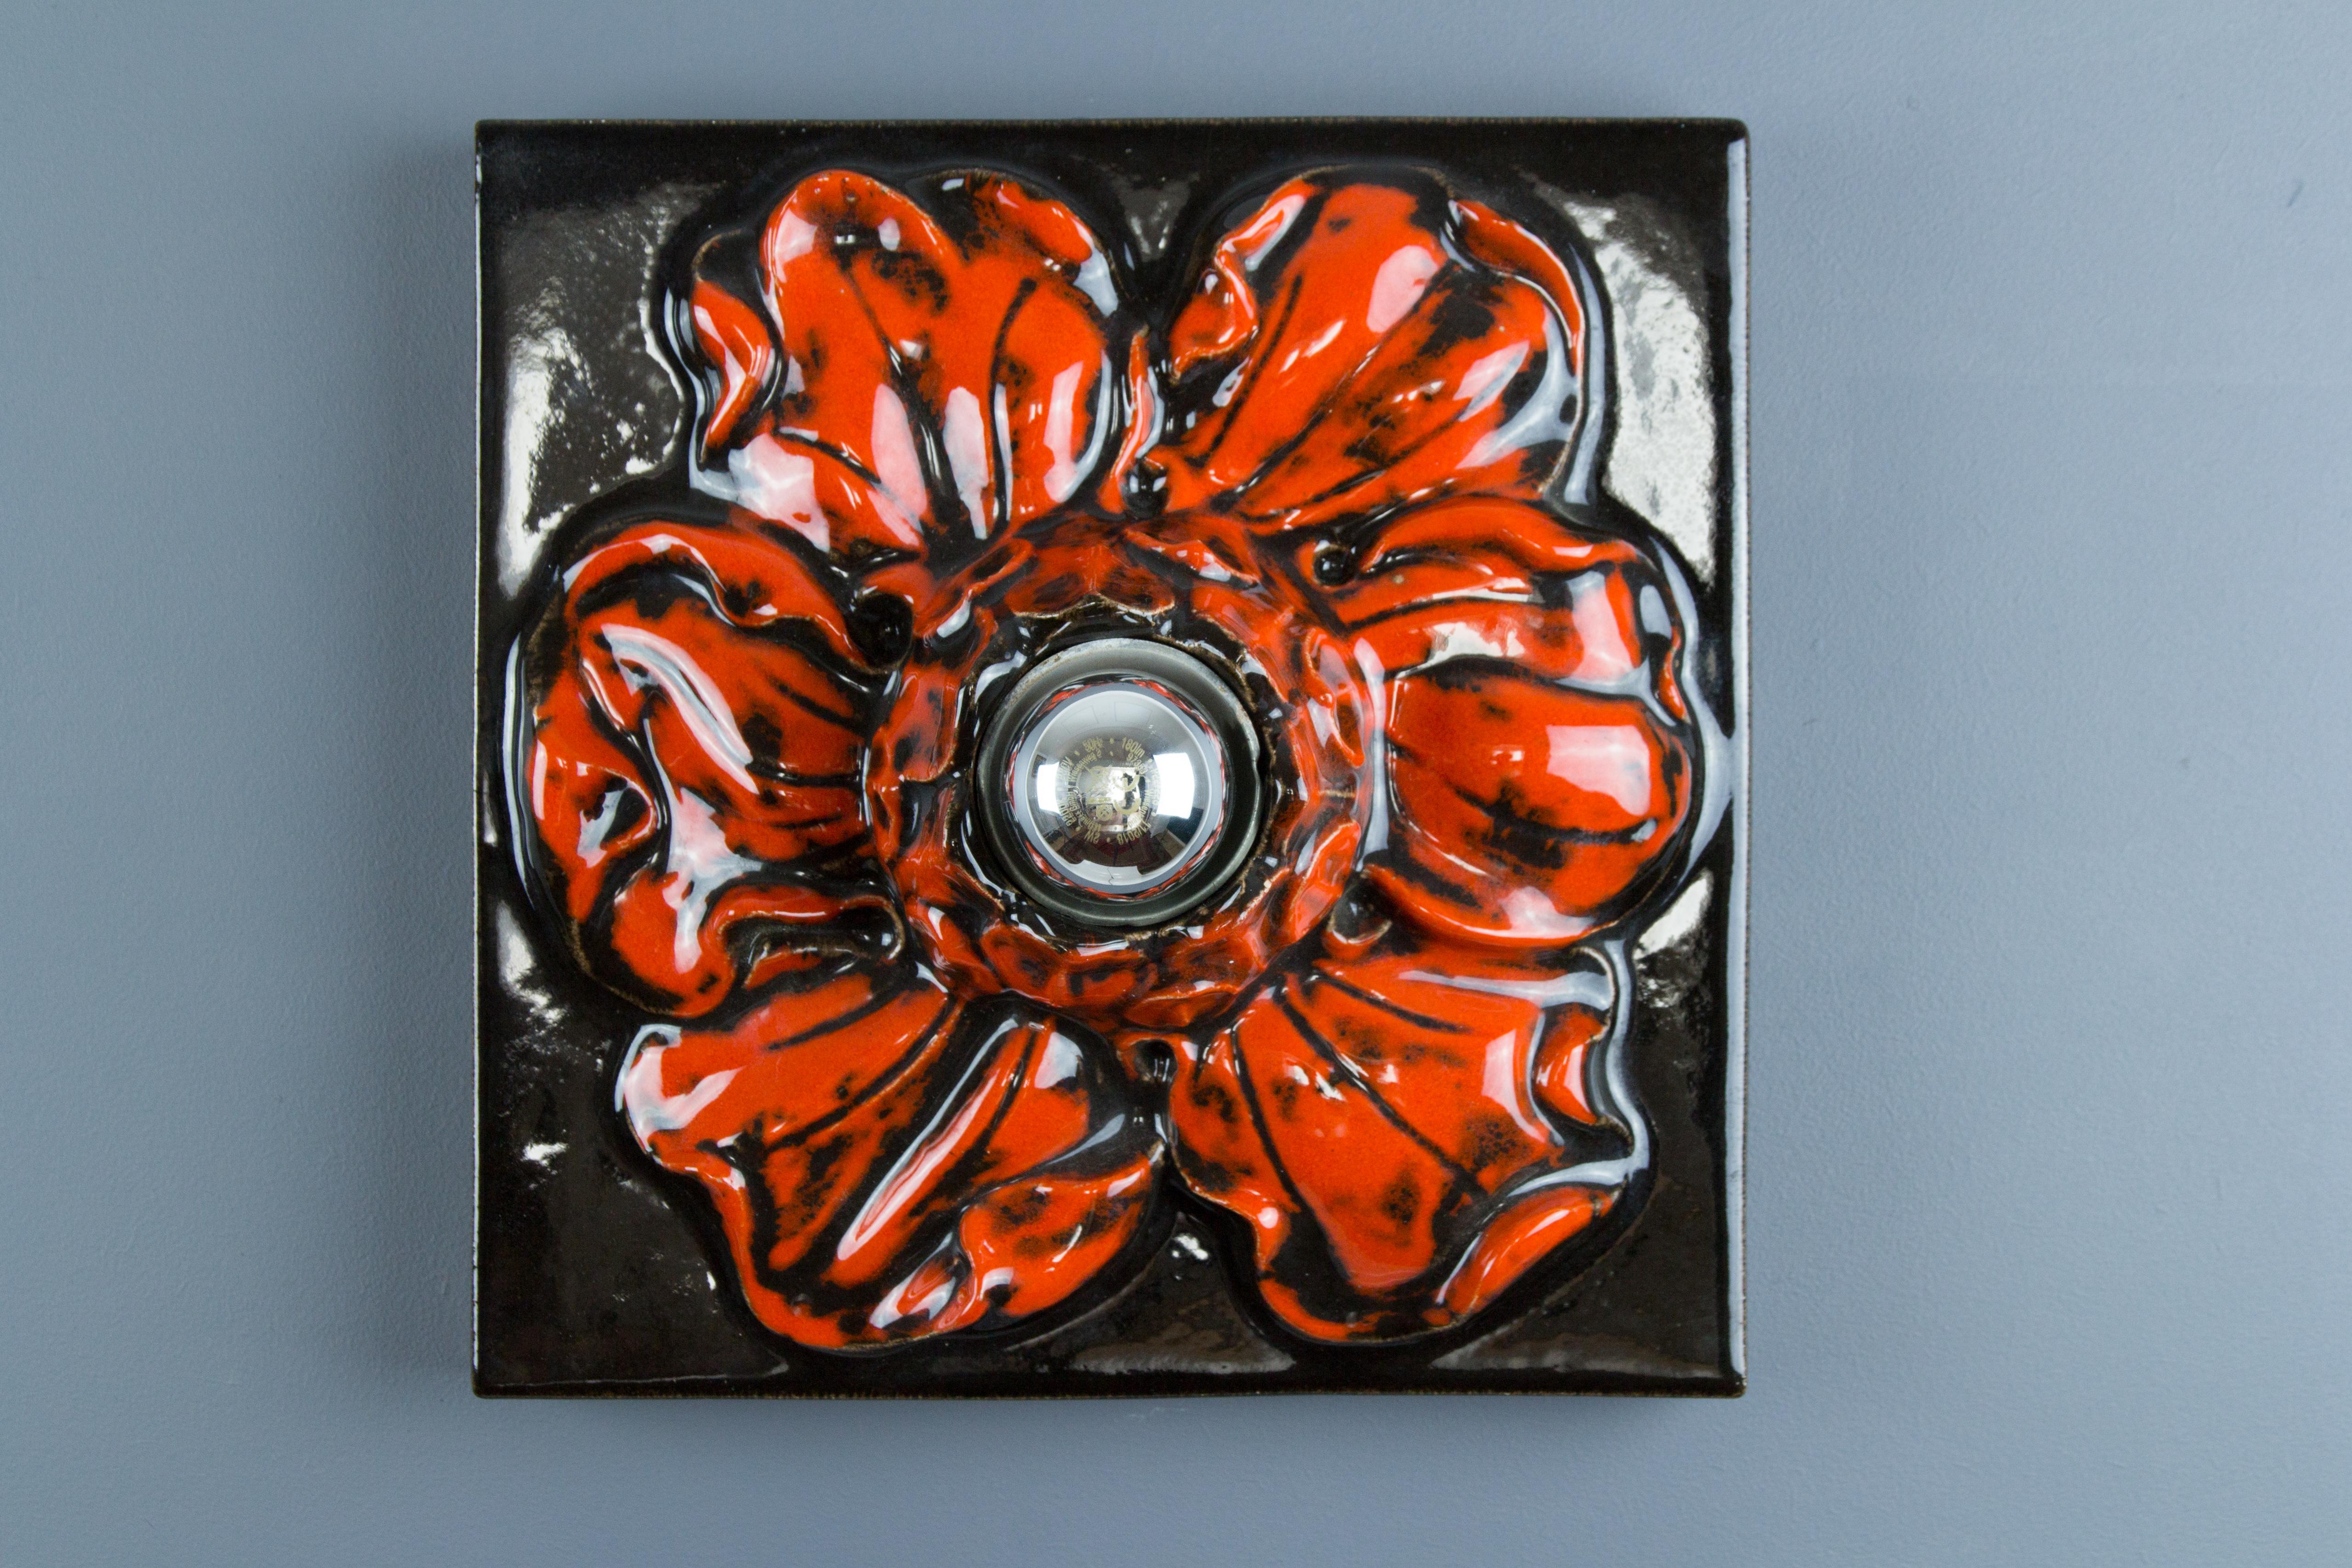 Beautiful ceramic square red wall lamp in the shape of a flower, made in Germany, in the 1960s. The mirror top light bulb is giving it a stunning light effect. The flower-shaped lamp can be used as a wall or table lamp or ceiling light fixture. One